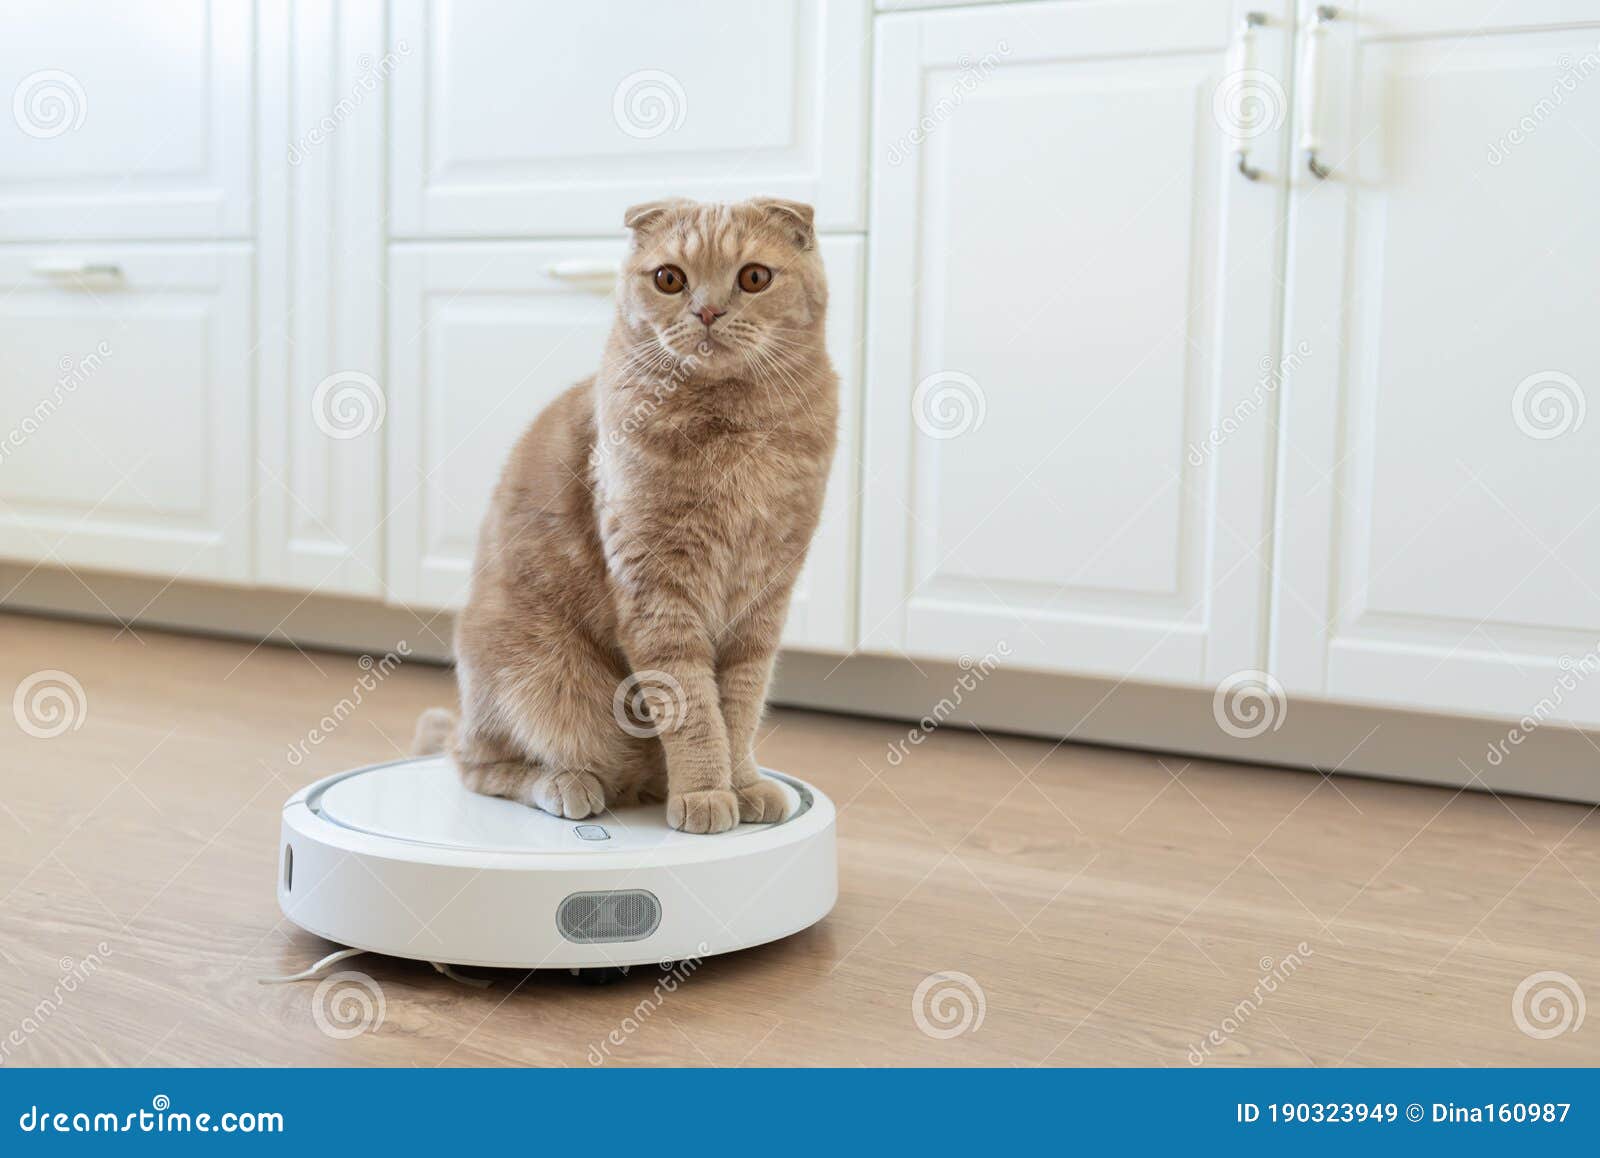 Funny Cat Sitting on a Robot Vacuum Cleaner. Pet Friendly Smart Vacuum Cleaner Stock - Image of dust, electronic: 190323949